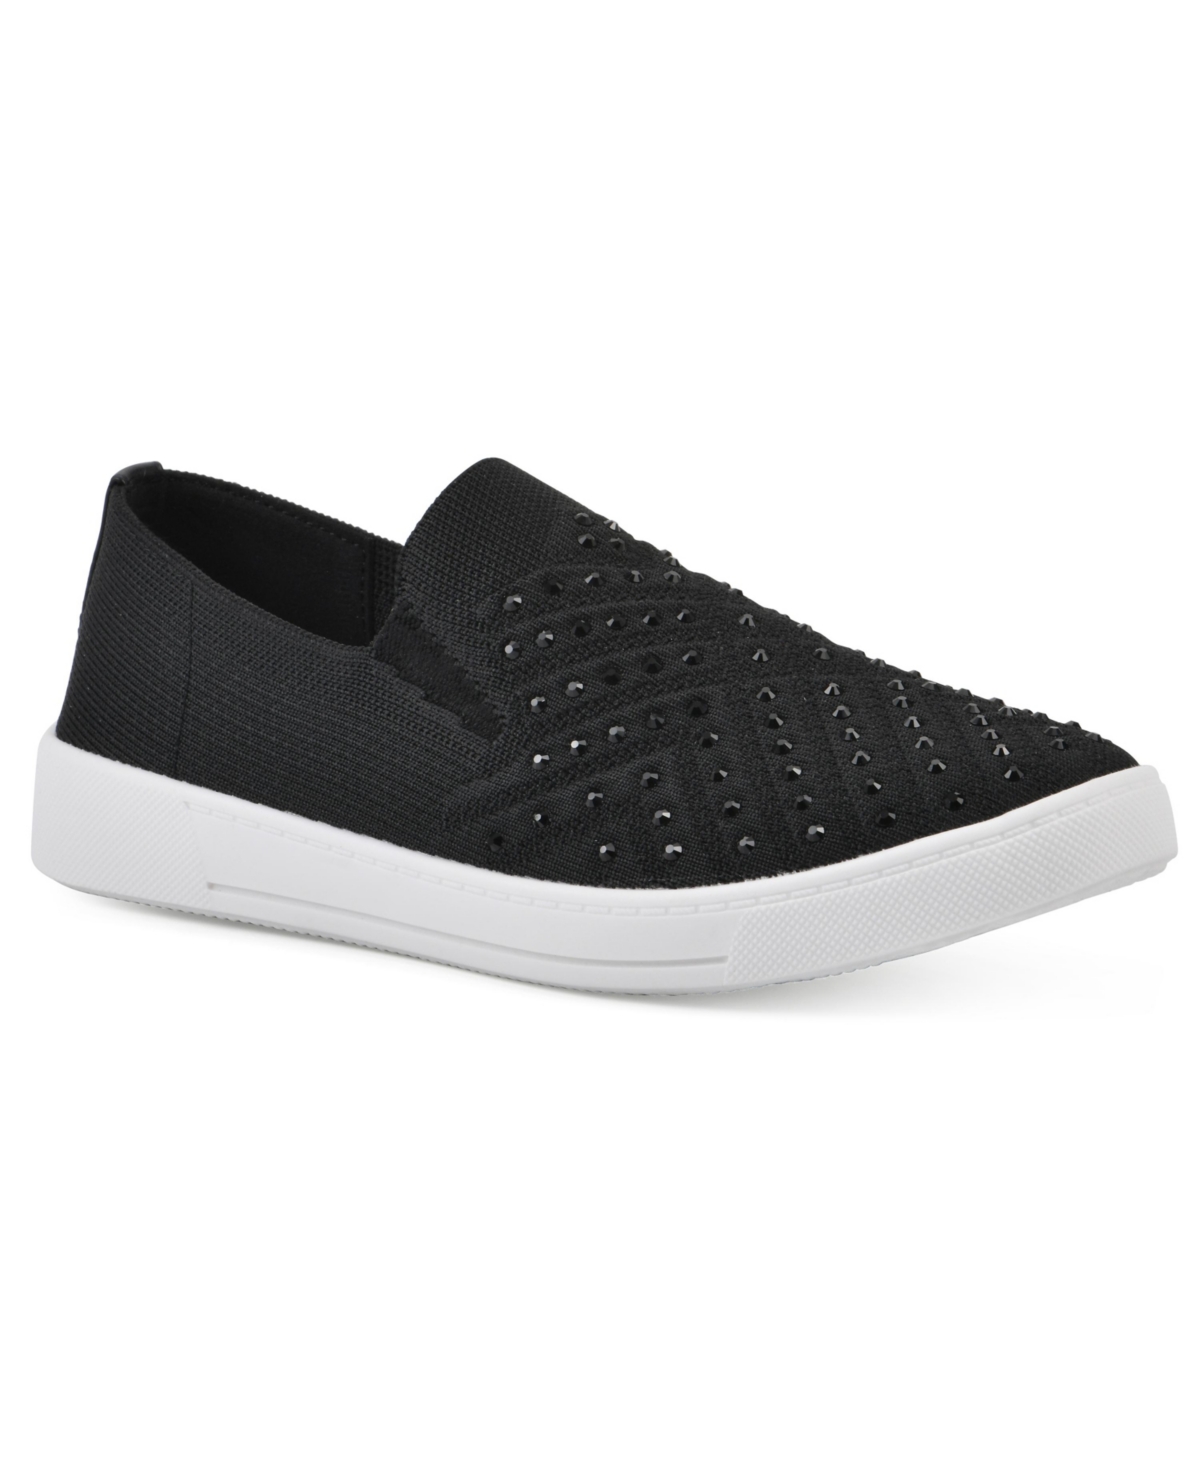 White Mountain Upbring Slip On Sneakers In Black Fabric